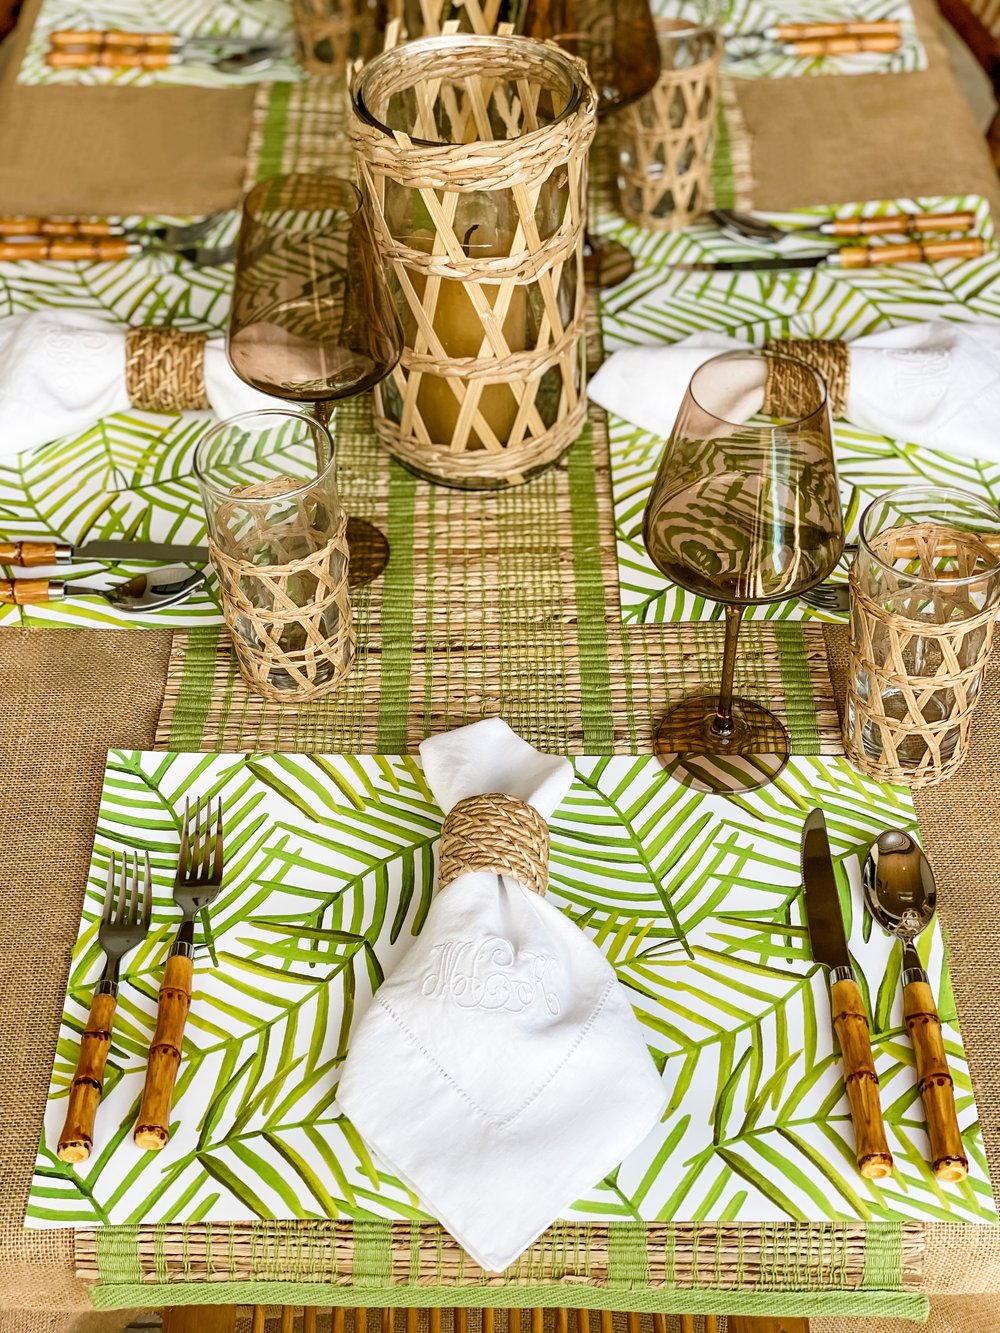 Green leaf paper placemats on a brown tablecloth with white napkins and other bamboo elements